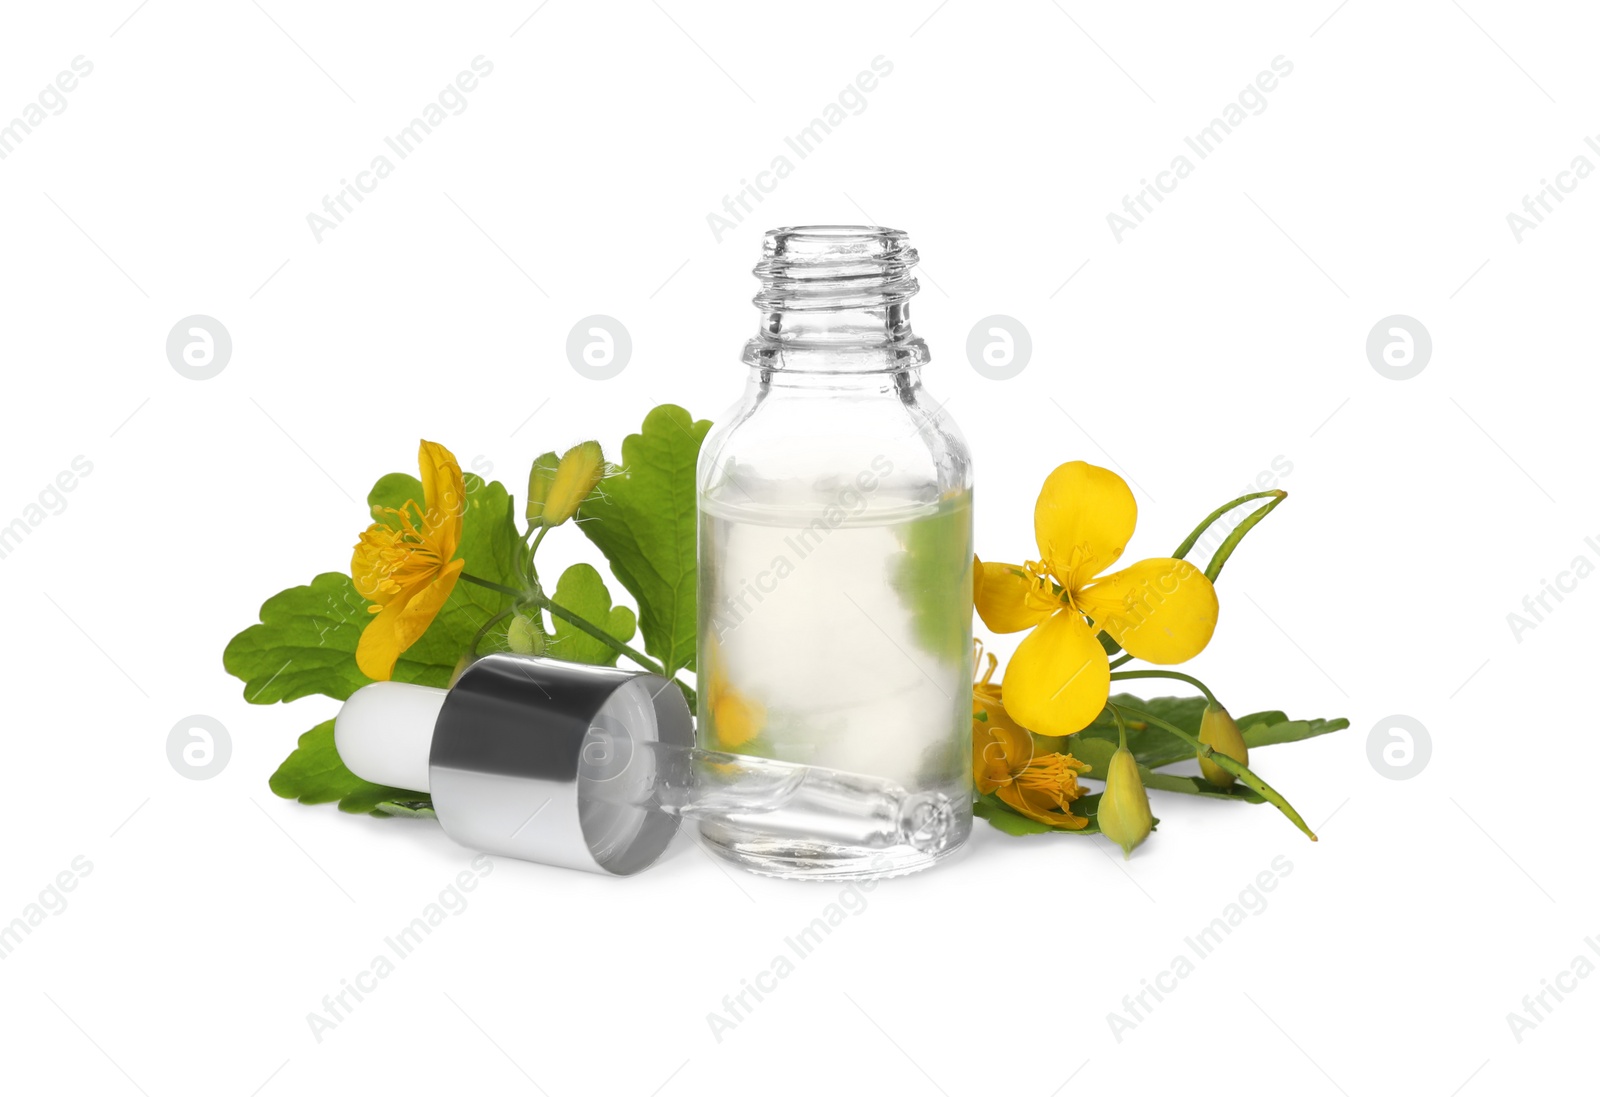 Photo of Bottle of essential oil, pipette and celandine on white background